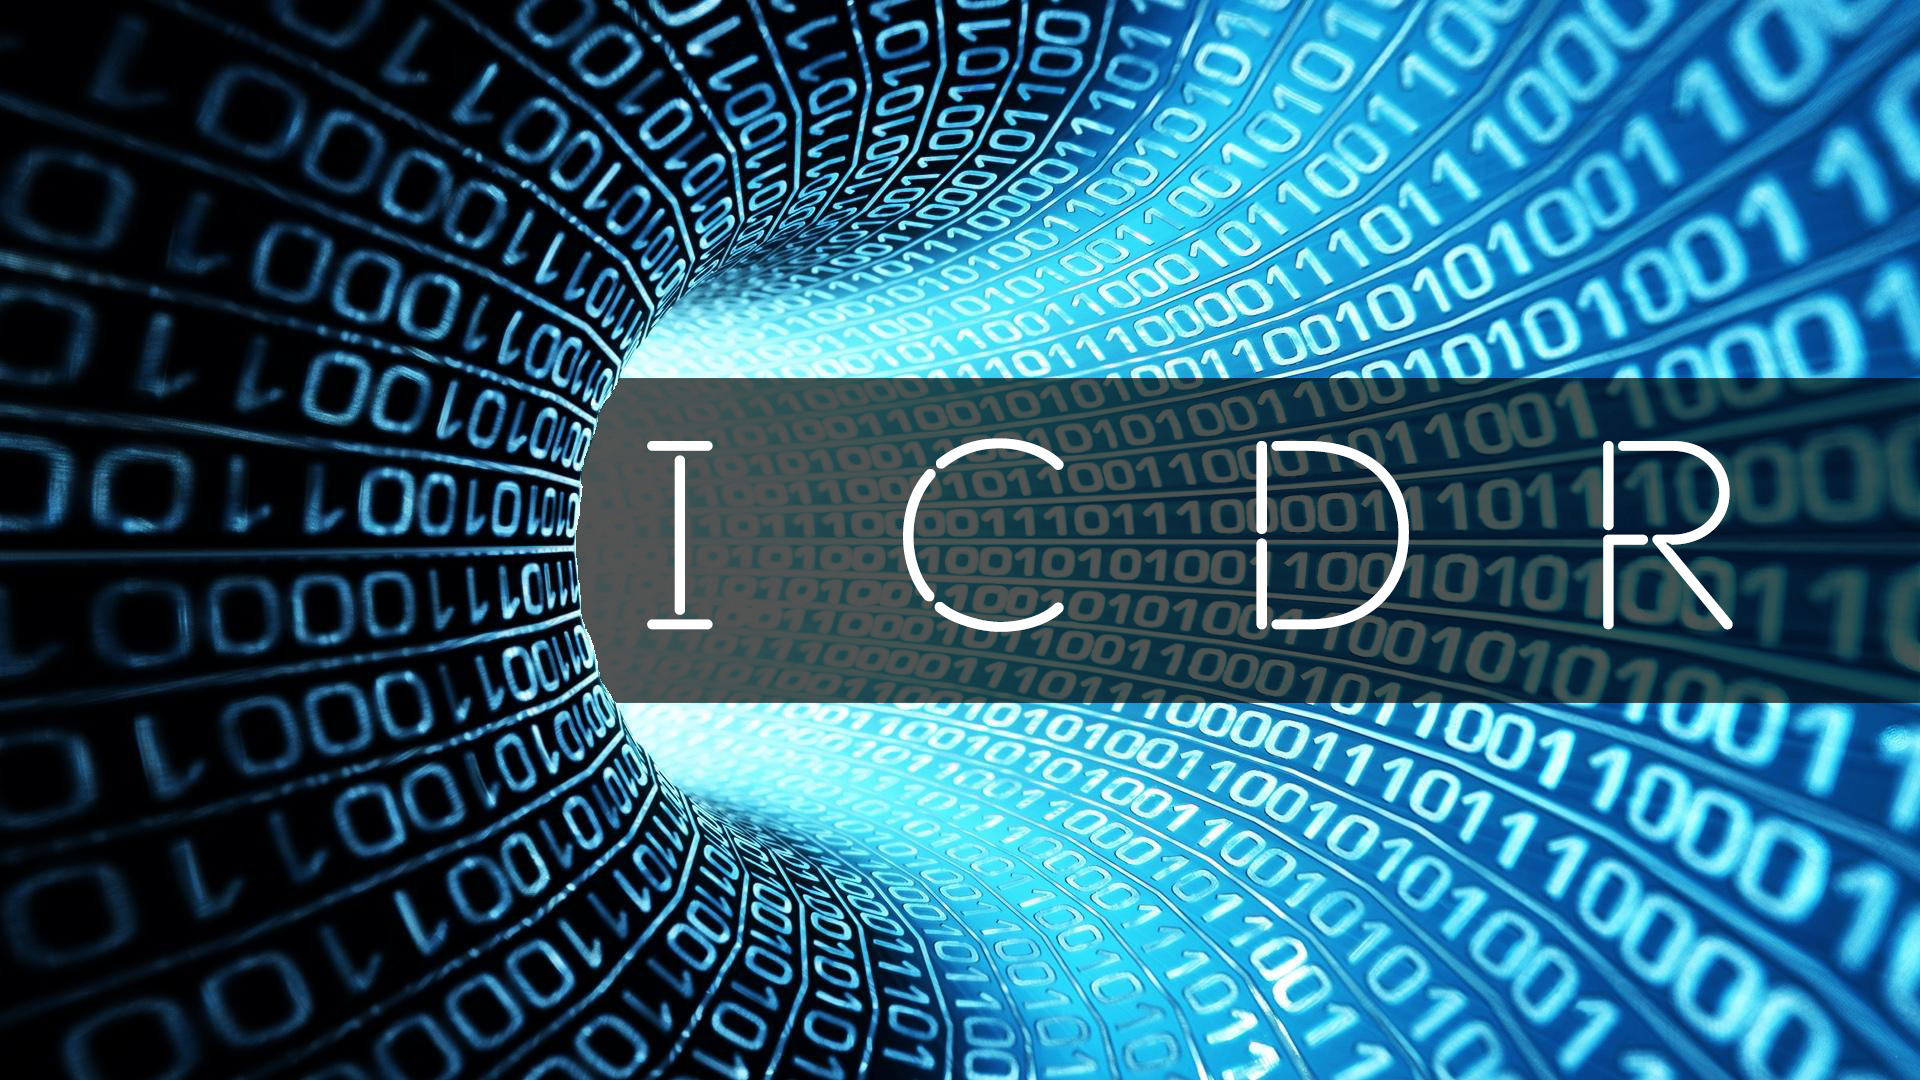 ICDR Mandatory Compliance of The Mobile Association